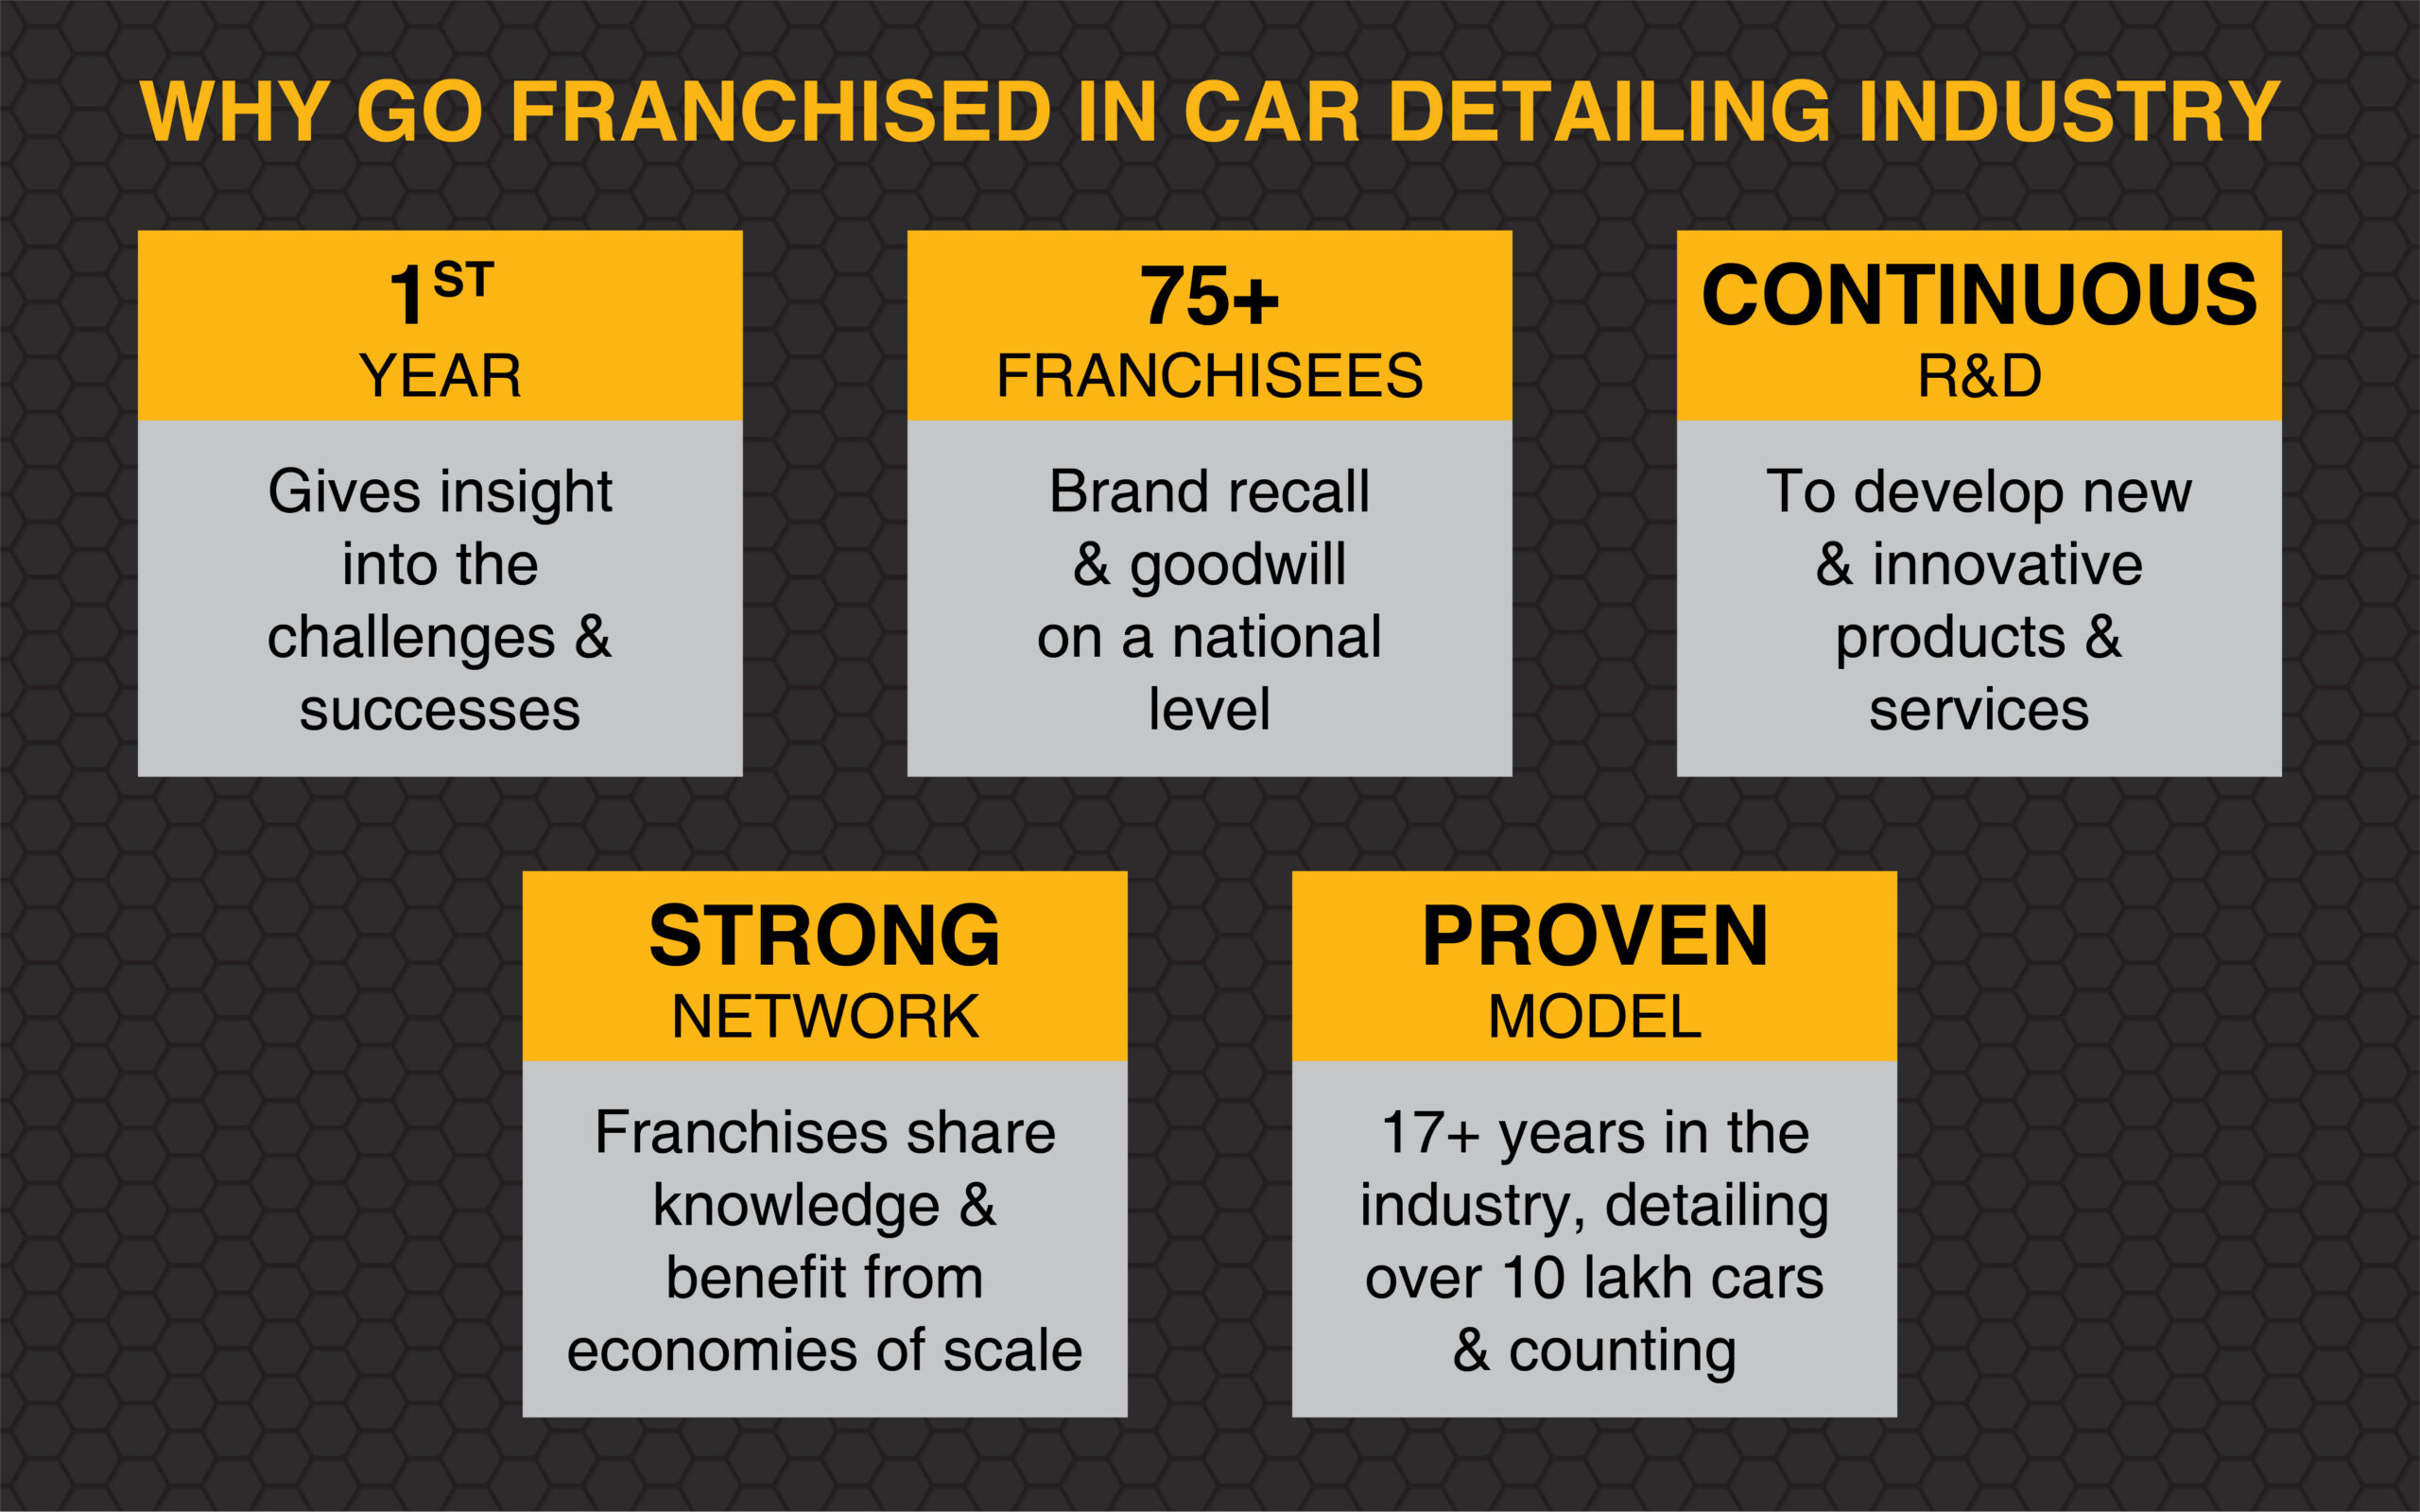 All the more reasons on franchising is a great idea for car detailing business